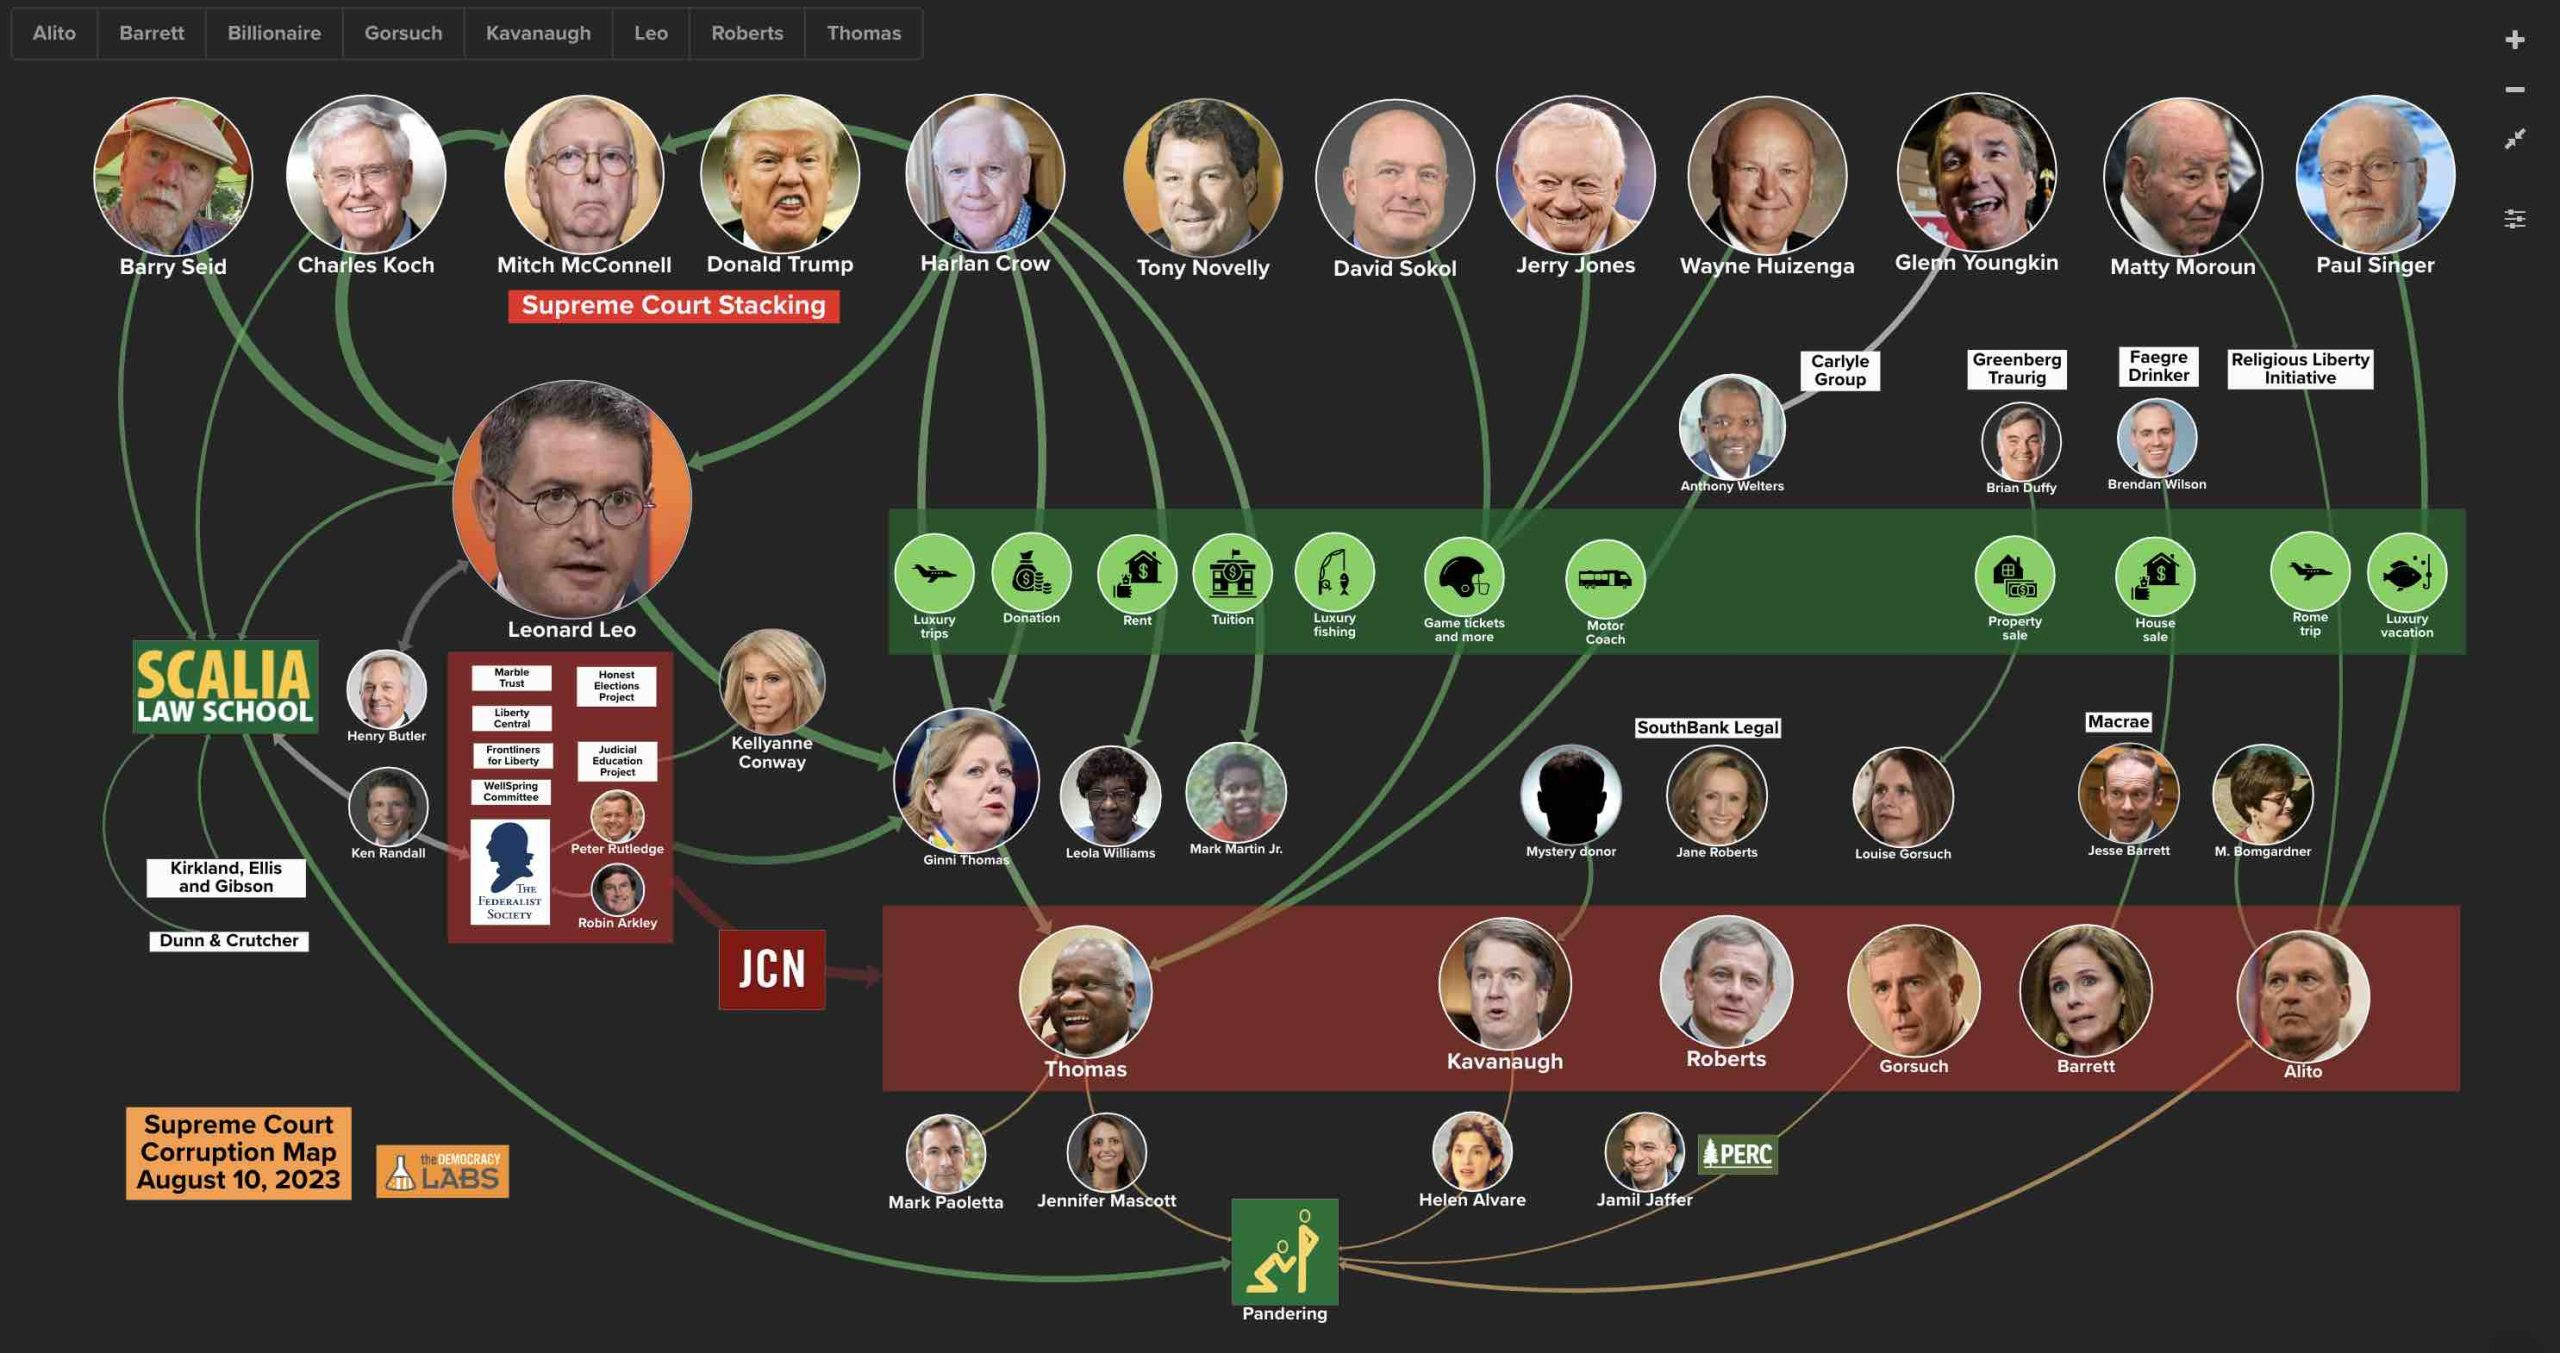 Use relationship maps to follow the massive Supreme Court Corruption